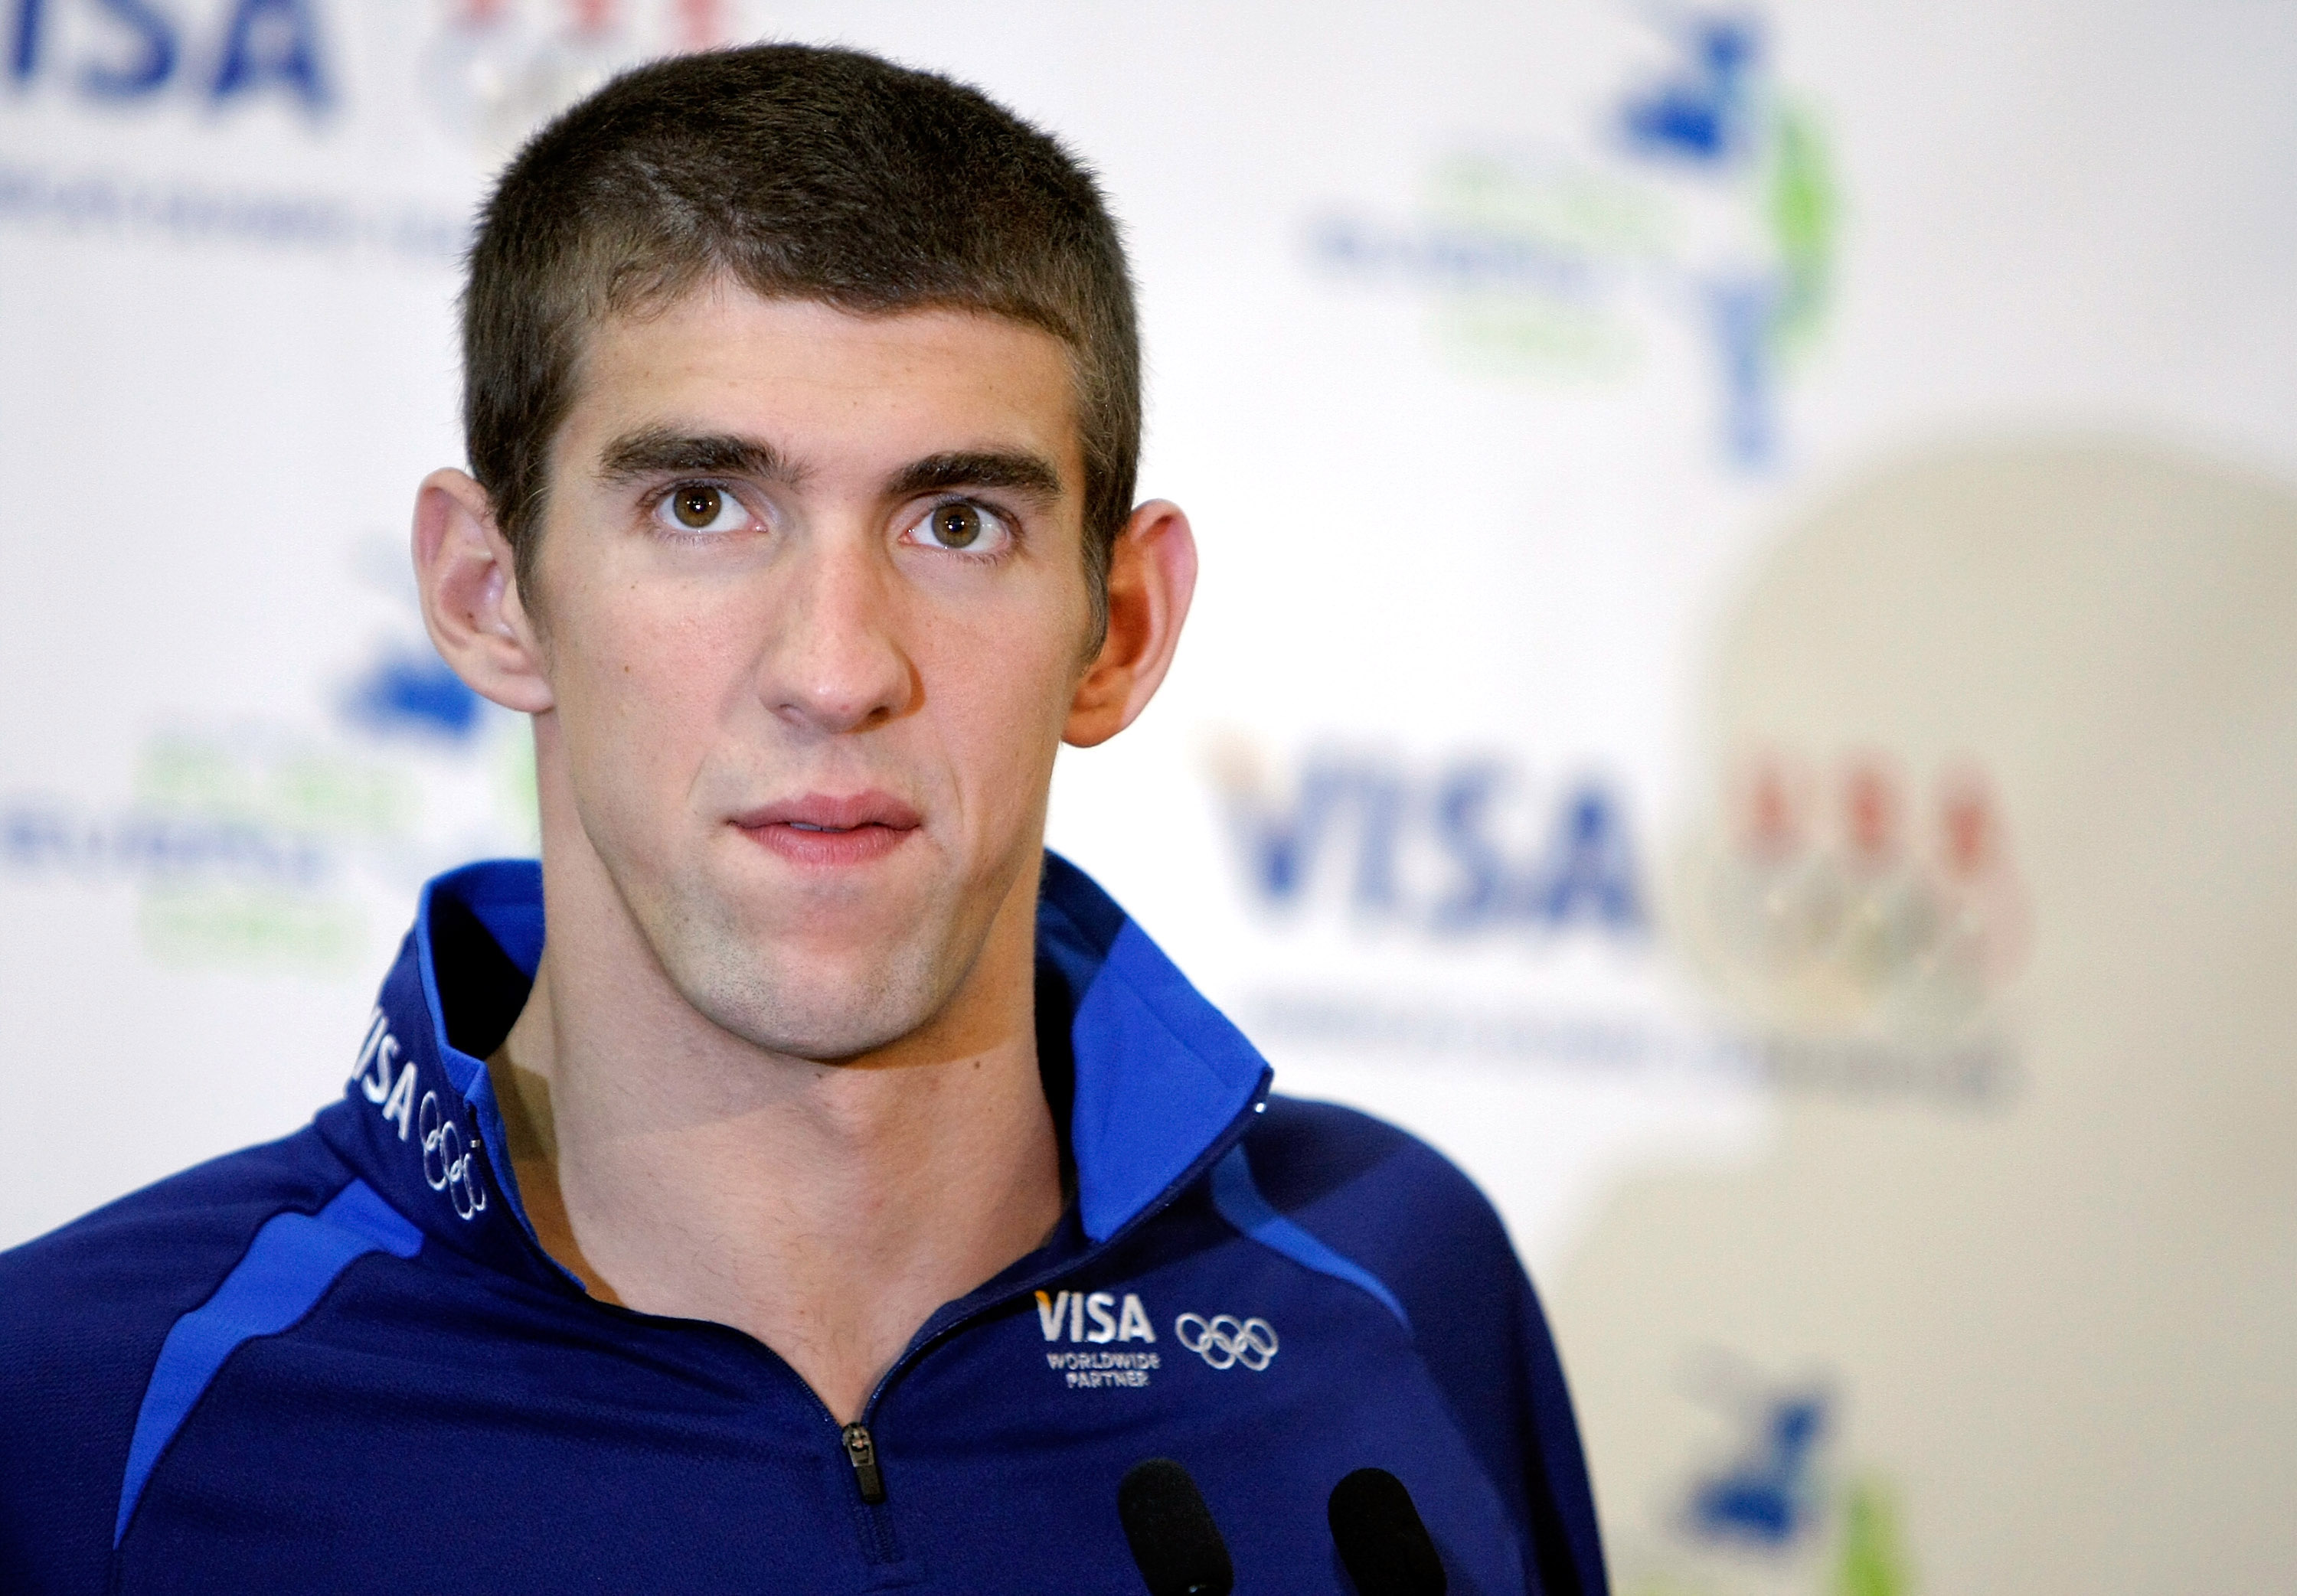 Michael Phelps at a press conference held at McBurney YMCA in New York City on August 28, 2008 | Source: Getty Images